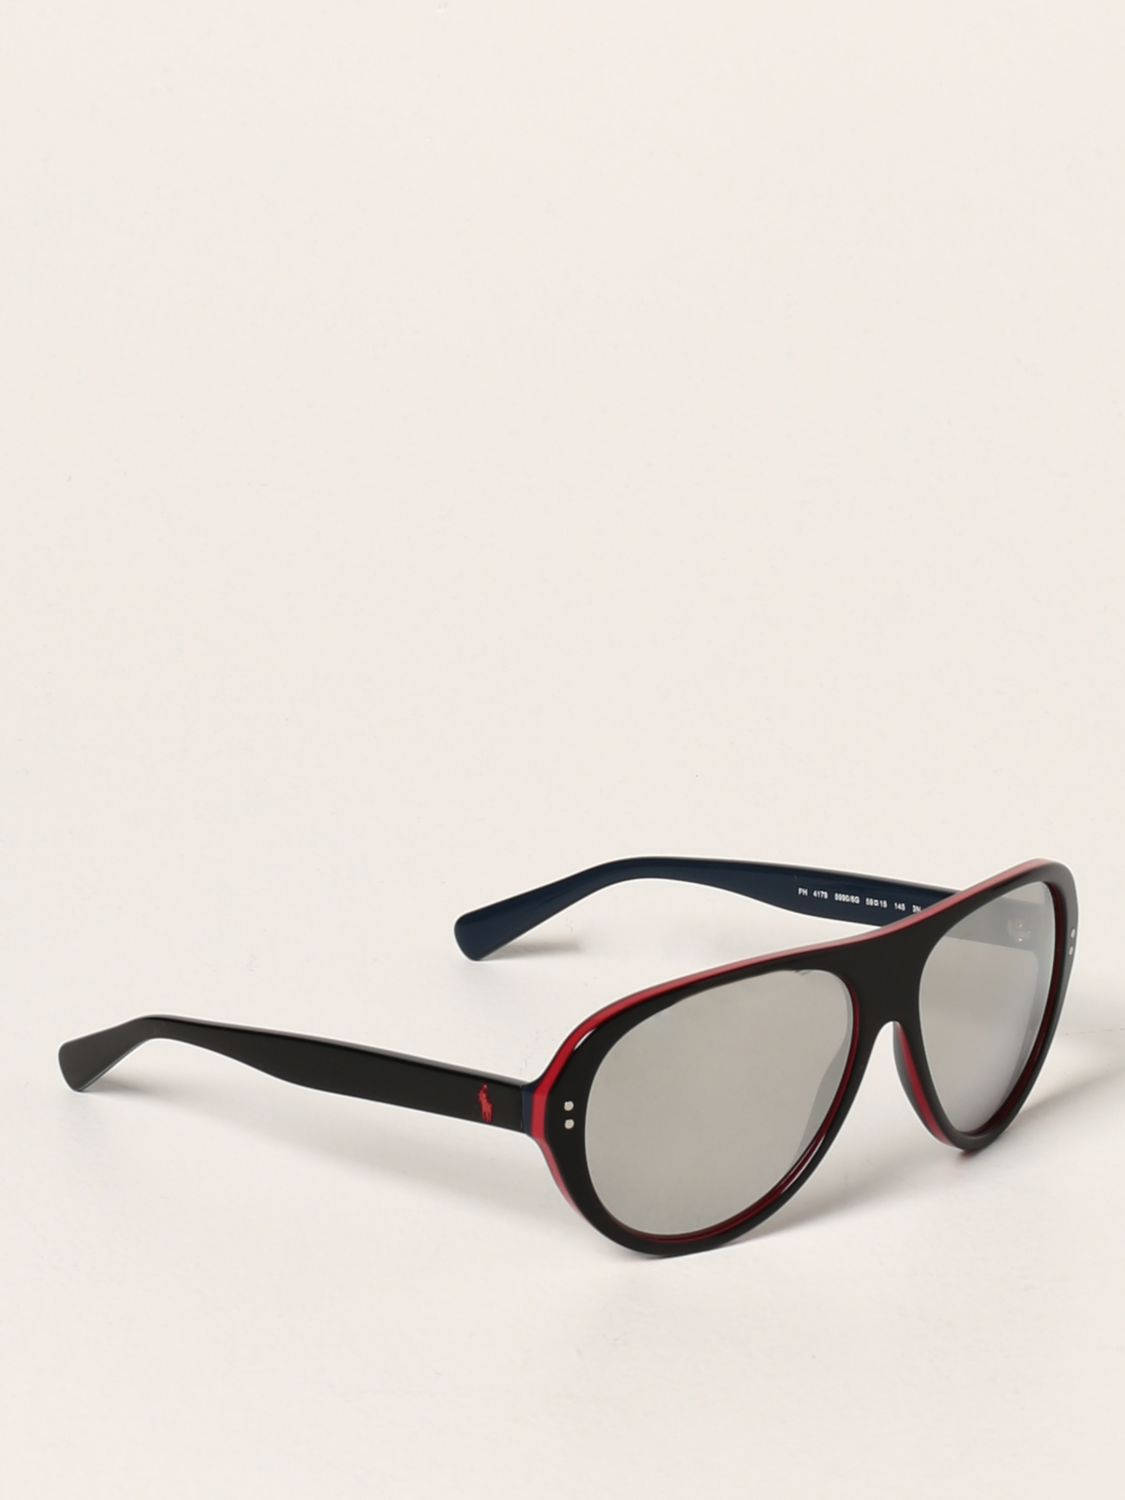 Polo Glasses Black And Red Wallpaper